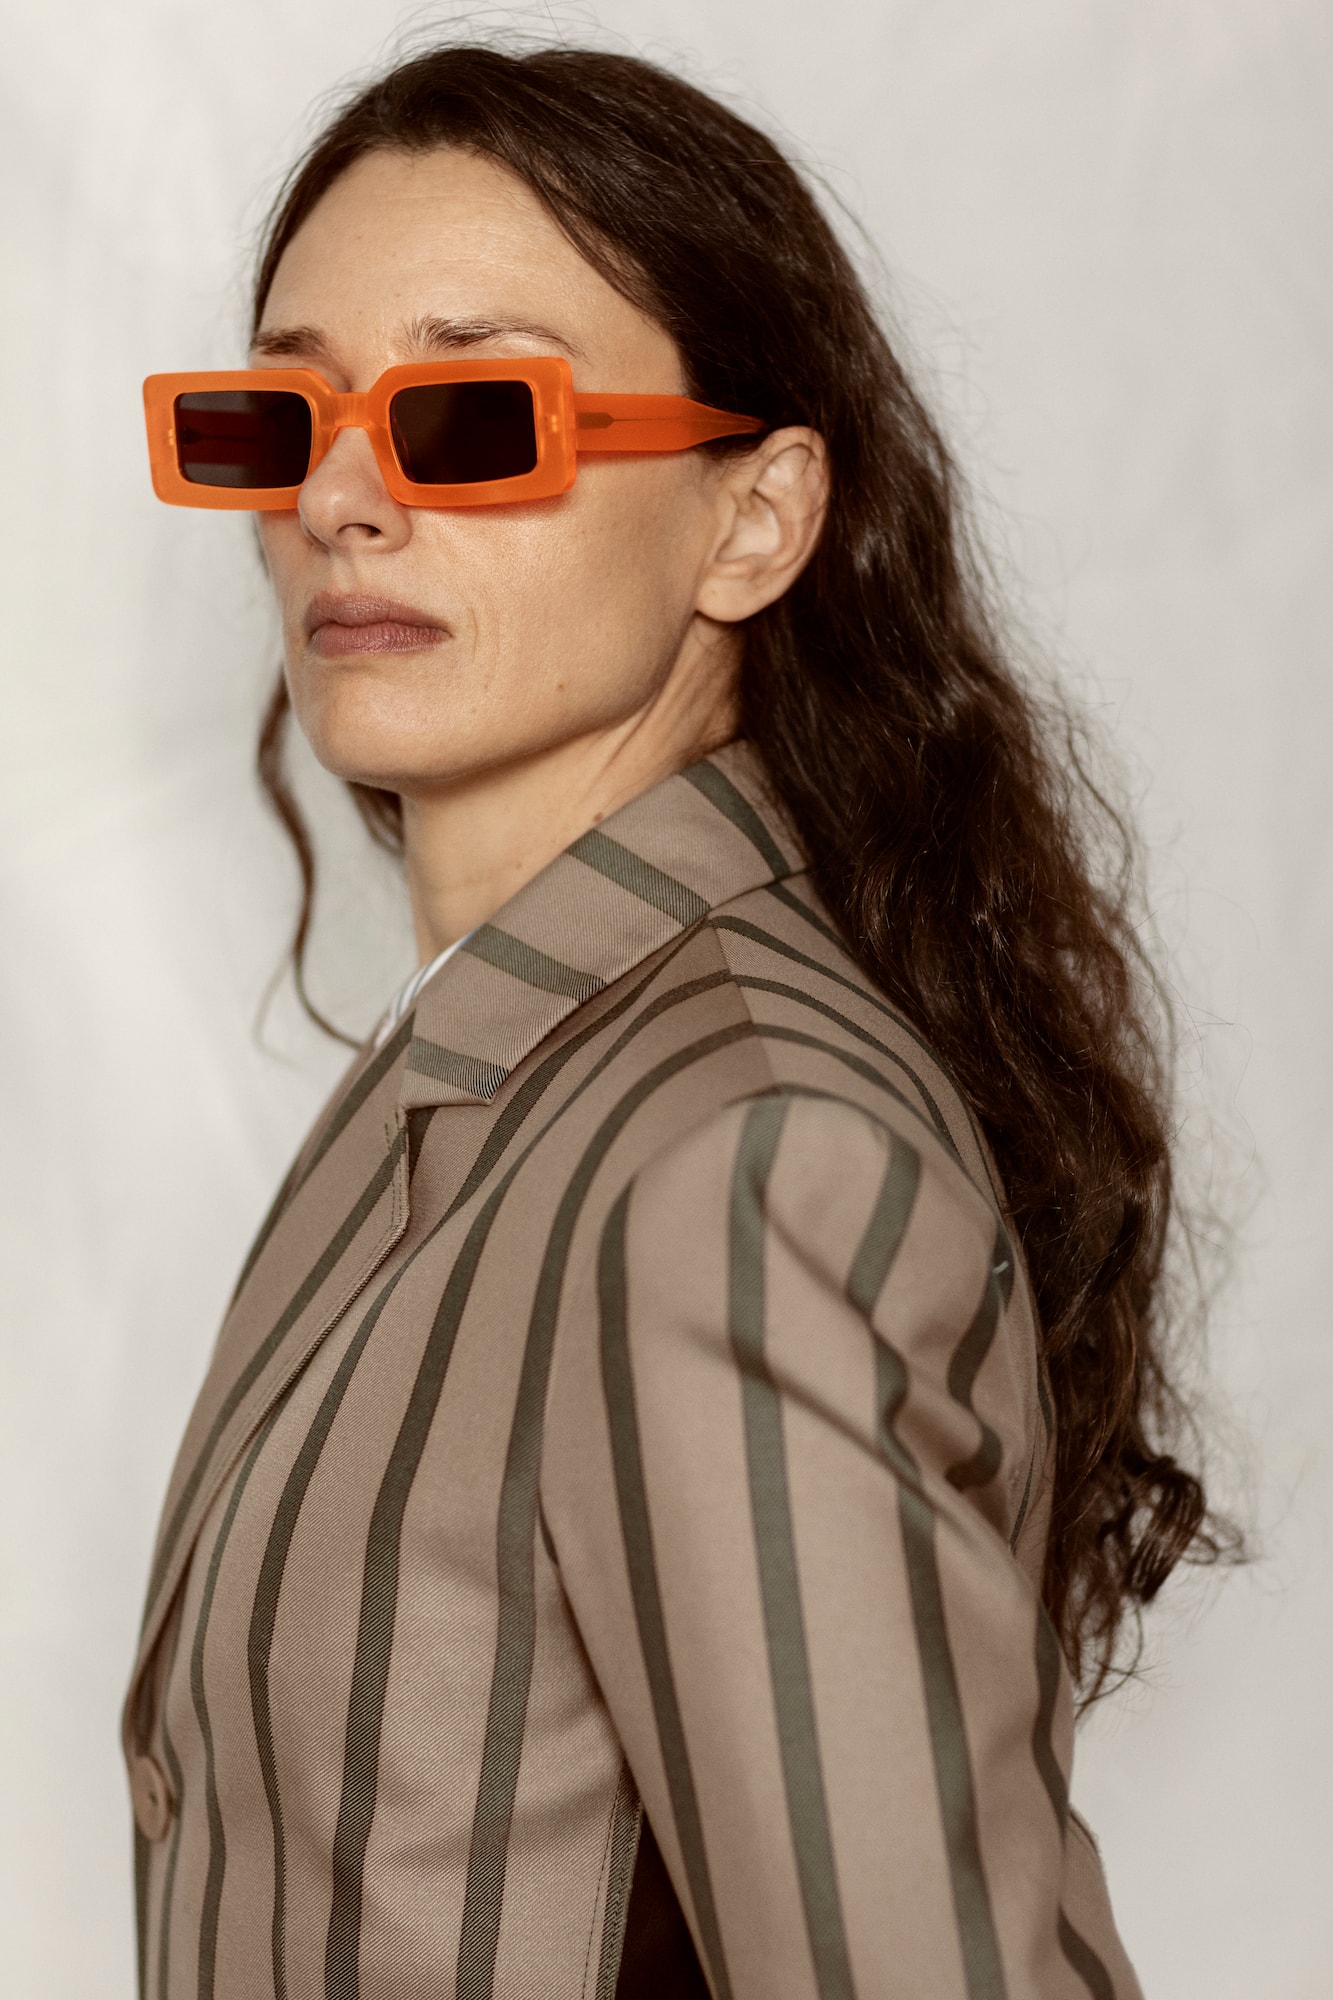 CHIMI Eyewear "NEON" Collection Campaign Shades Sunglasses Accessory Statement Sunnies 